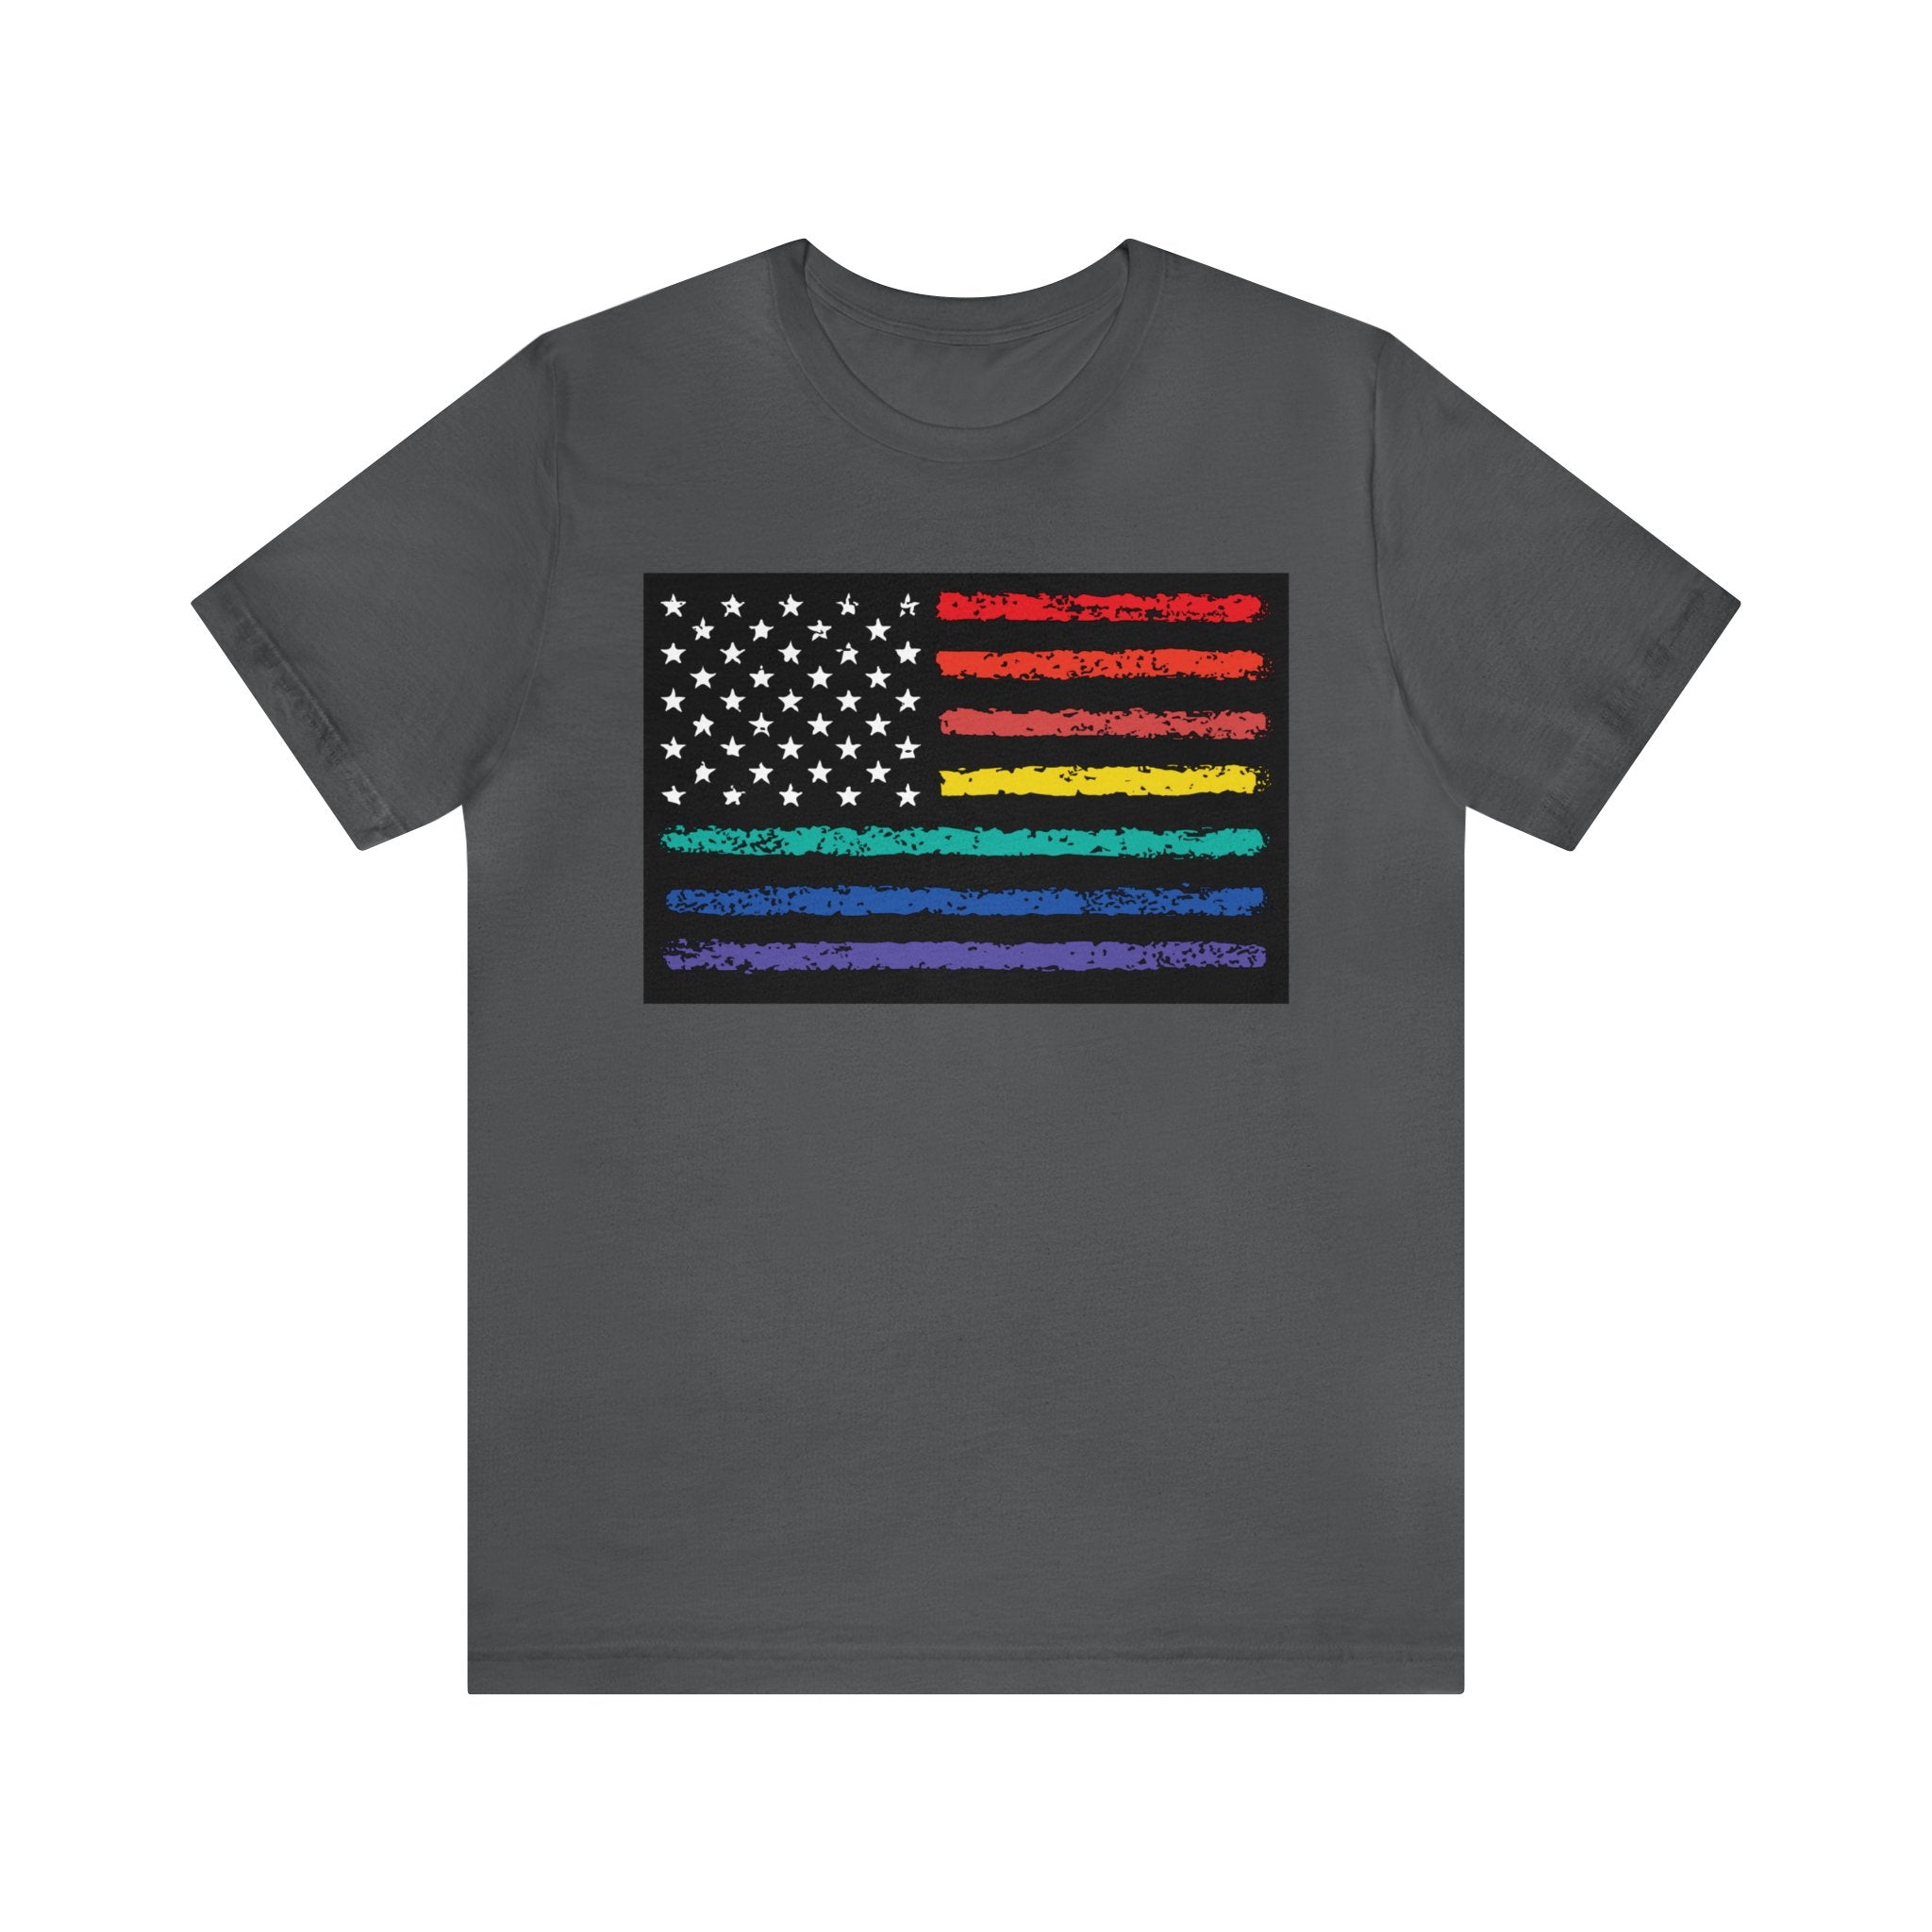 Black Friday America! : Unisex 100% Comfy Cotton, T-Shirt by Bella+Canvas